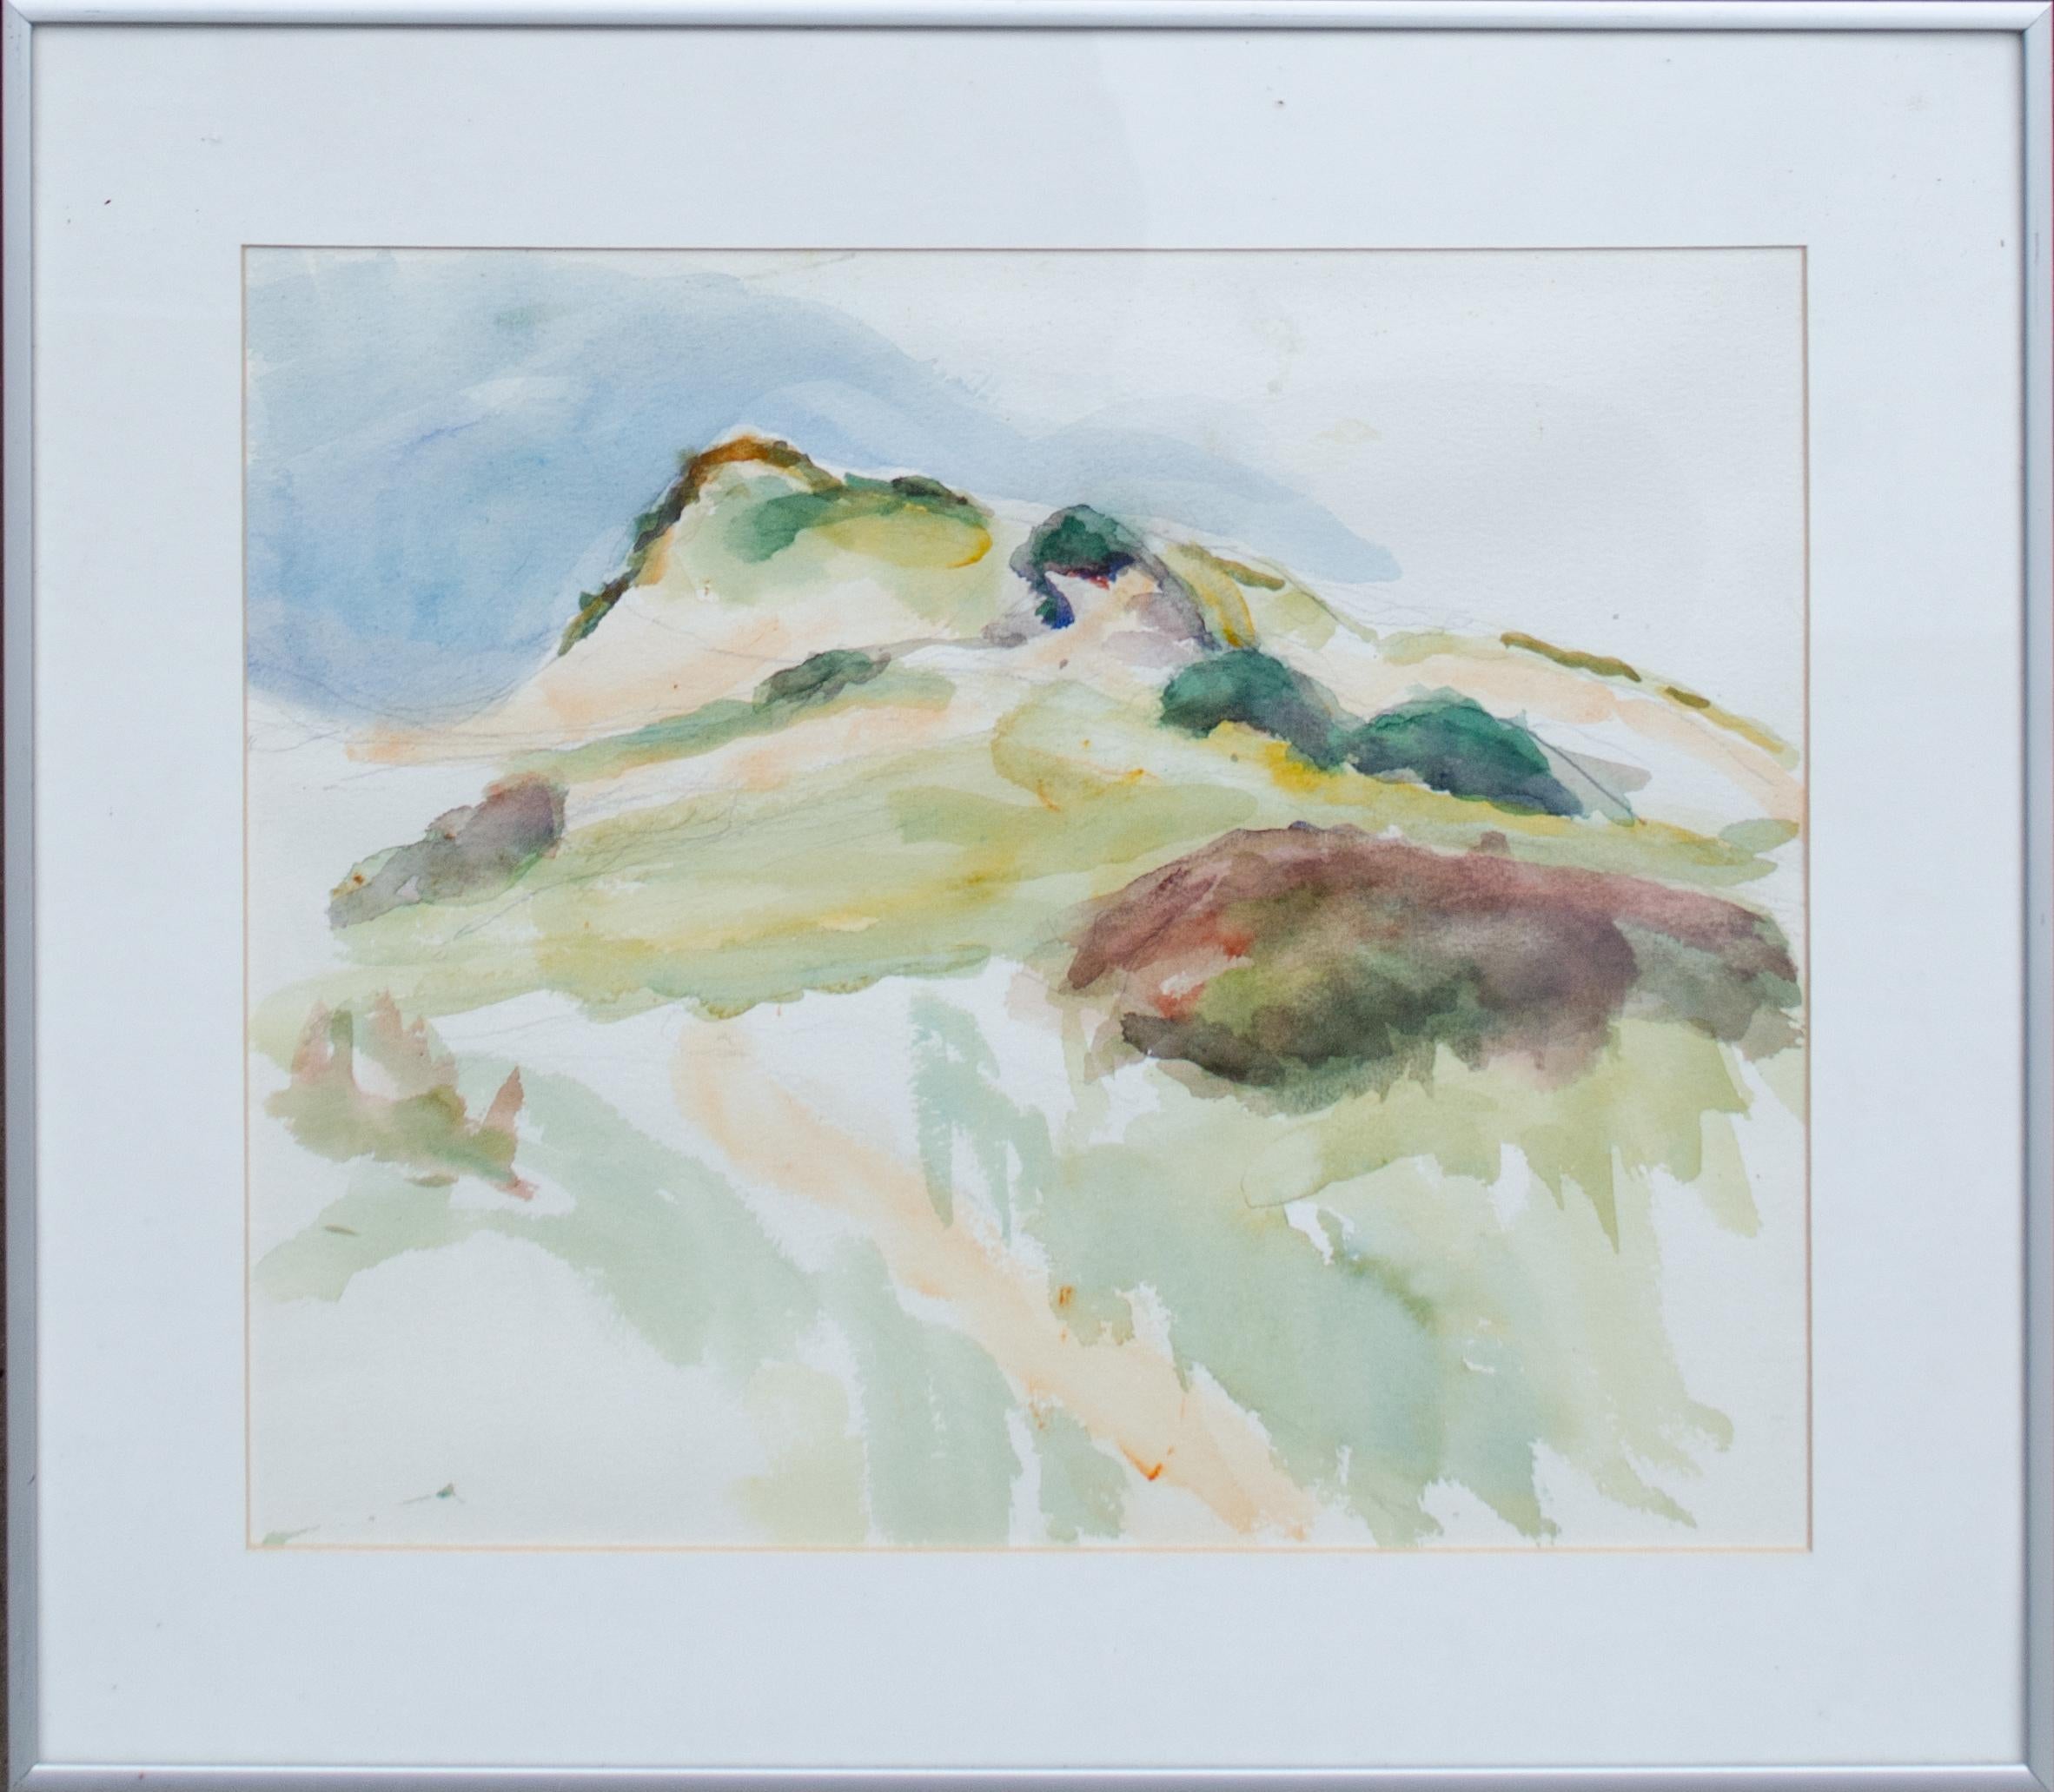 Edith Schloss (1919-2011)
Untitled, c. 1970
Watercolor on paper
Sight size: 10 1/2 x 13 in.
Framed: 14 3/4 x 17 1/4 in.

Edith Schloss is best known for knowing 